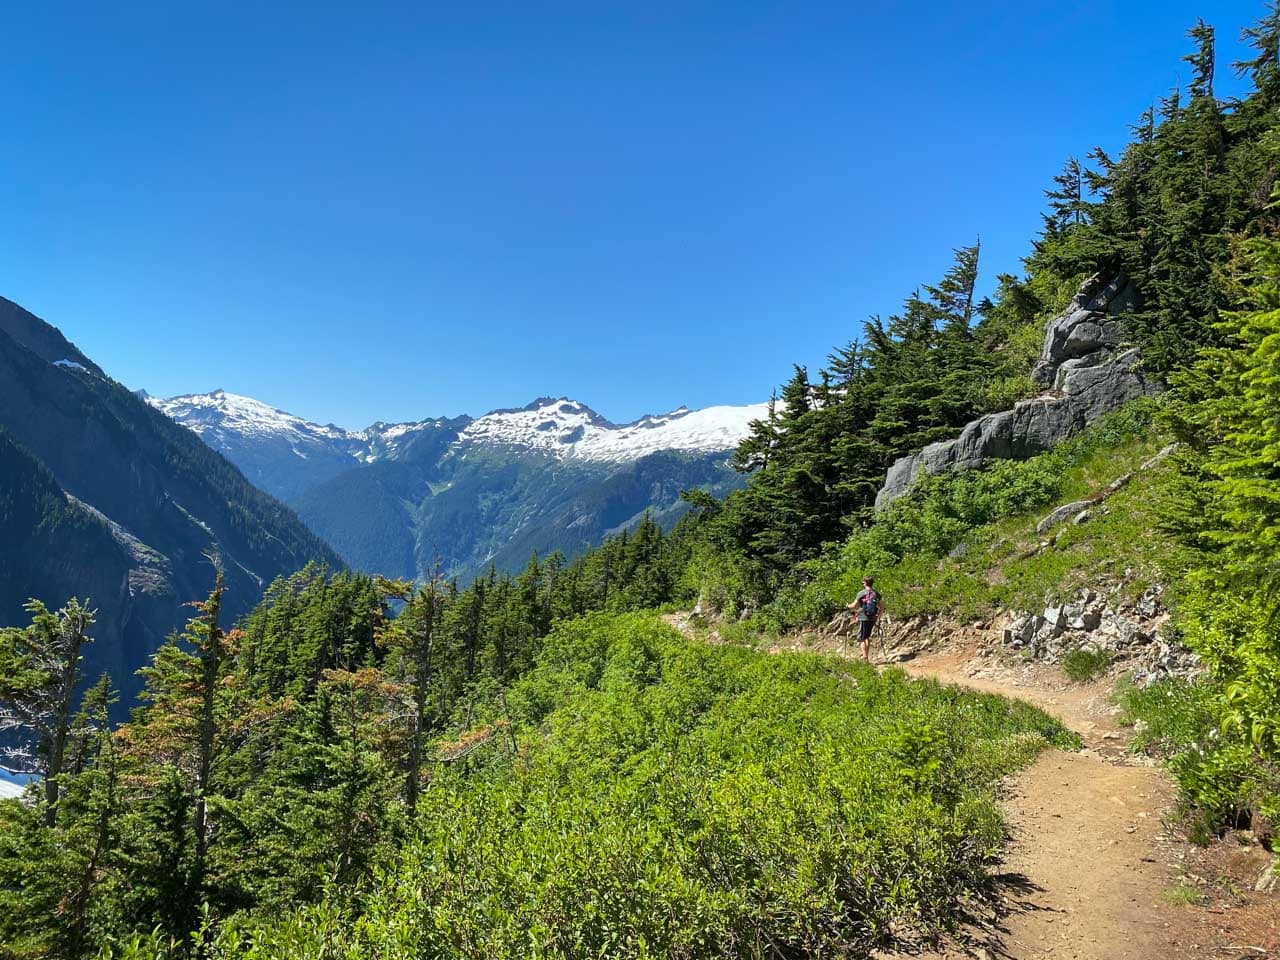 Cascade Pass hiker in North Cascades National Park, one of the less-crowded national parks to visit this summer